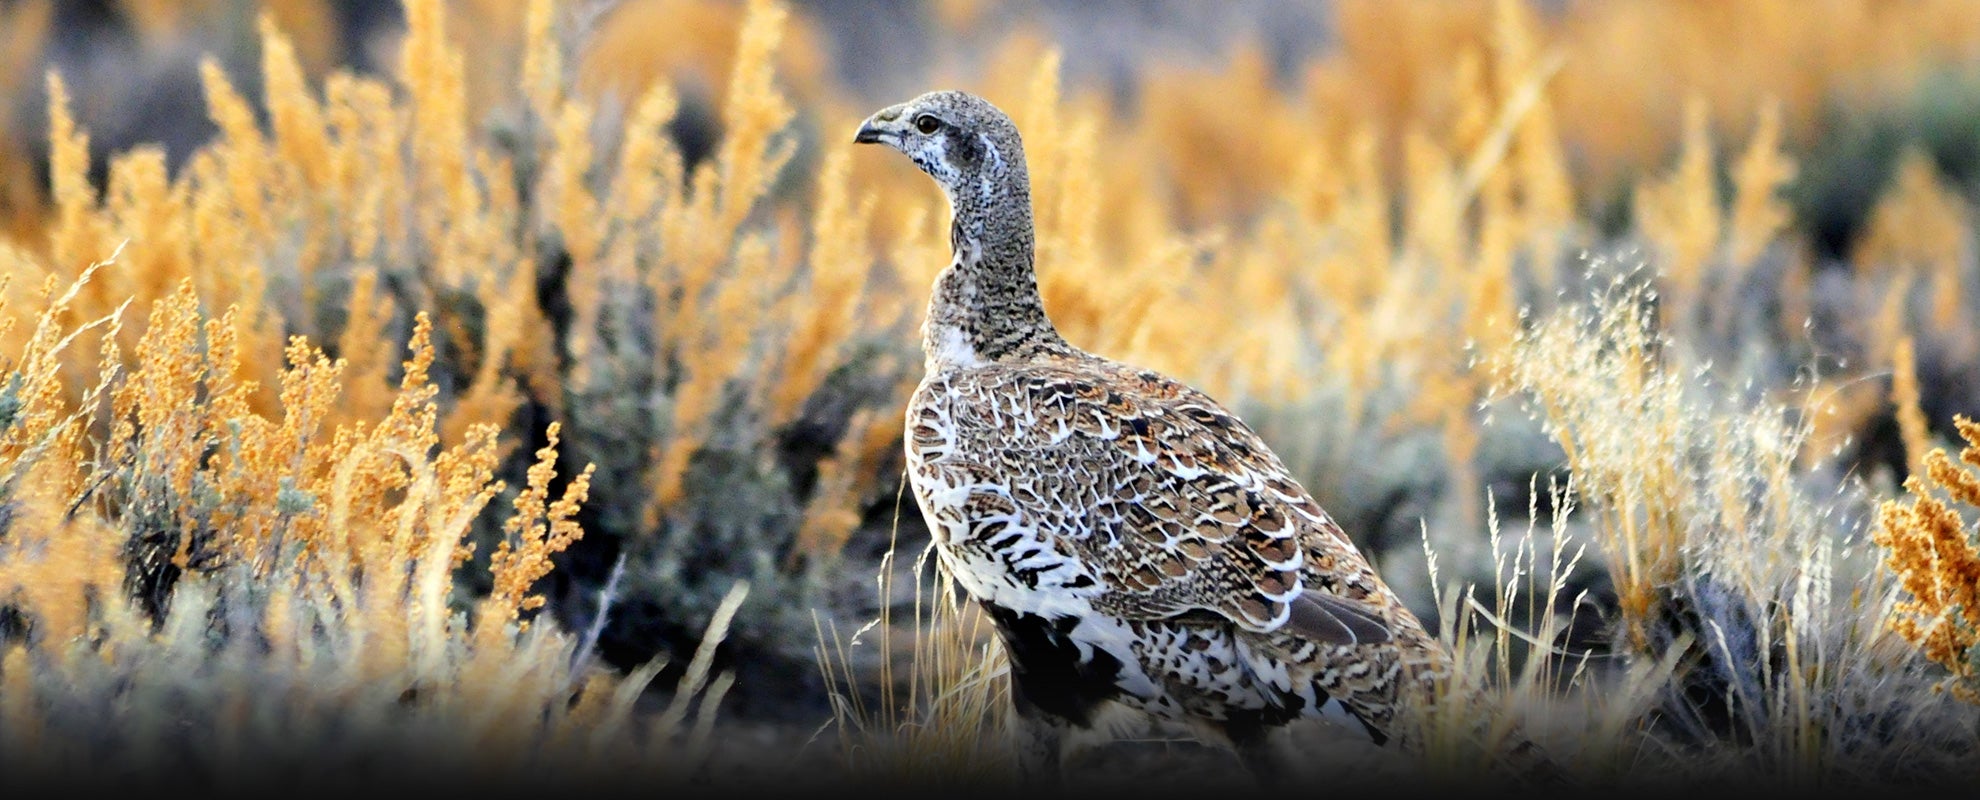 Today, the Endangered Species Act is under fire, and species across the country need your help—including the sage grouse.